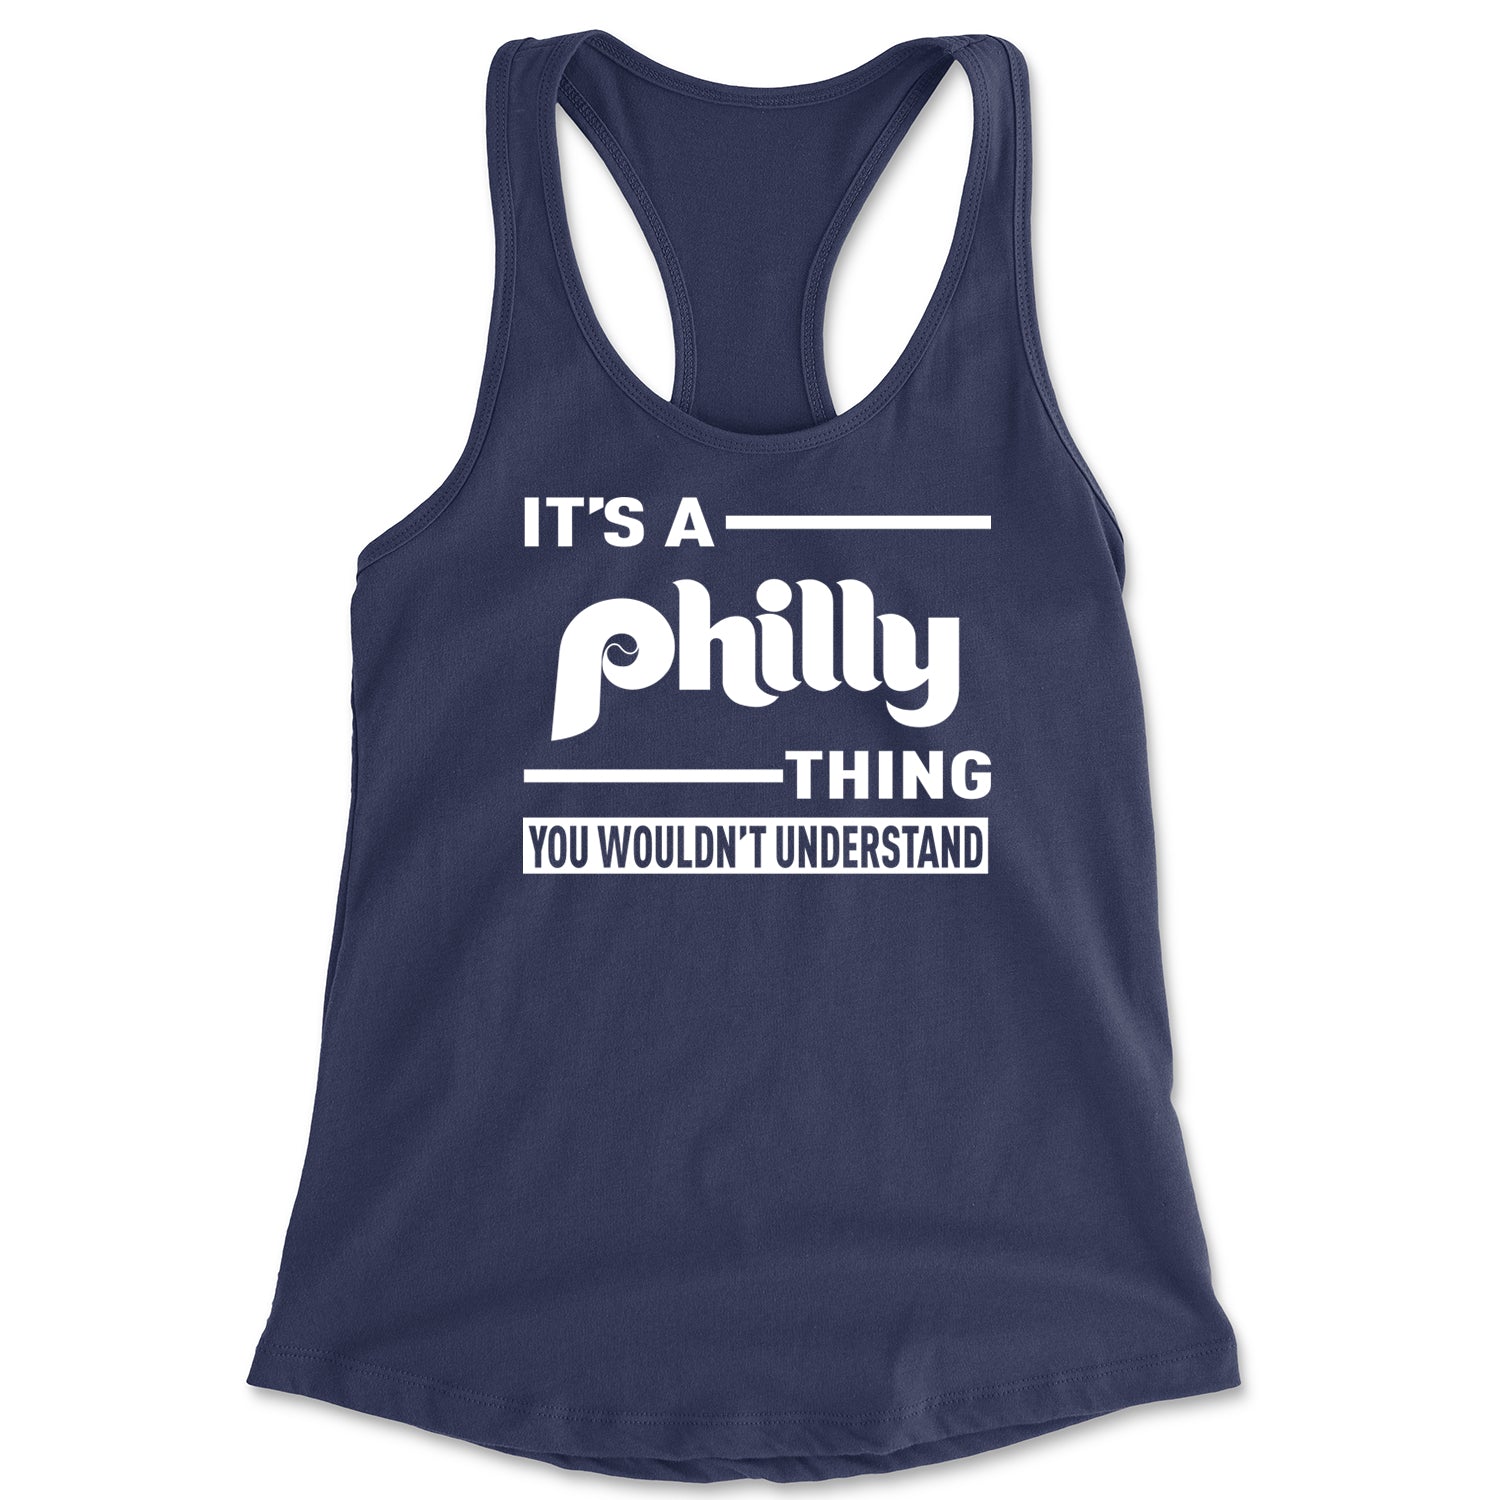 It's A Philly Thing, You Wouldn't Understand Racerback Tank Top for Women baseball, filly, football, jawn, morgan, Philadelphia, philli by Expression Tees